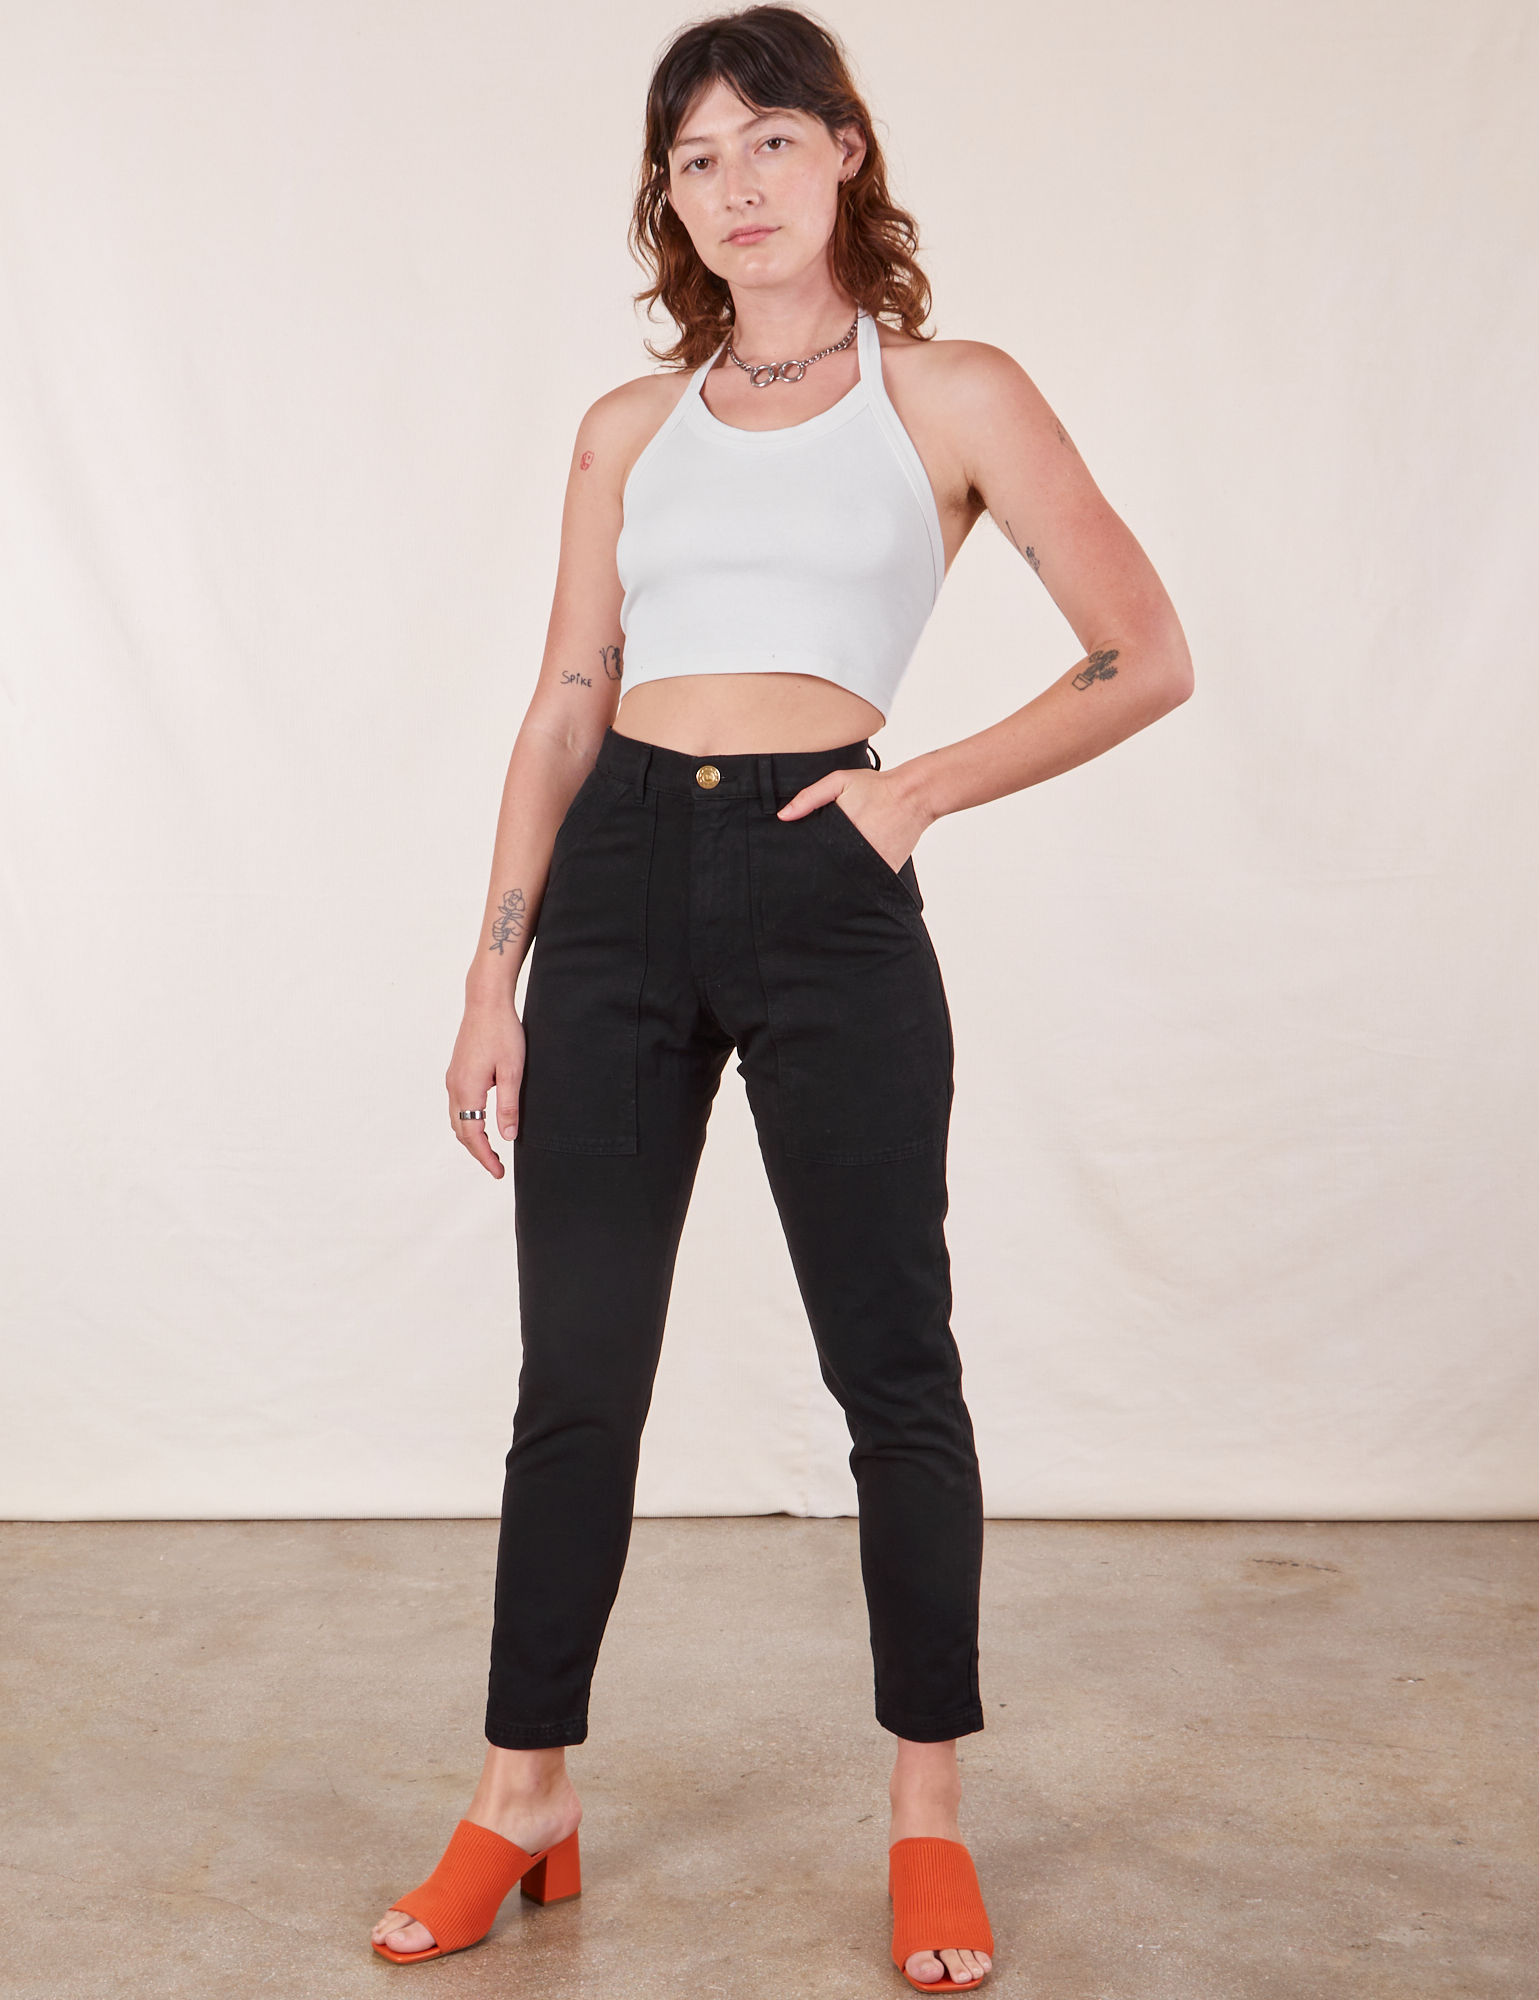 Alex is 5'8" and wearing XXS Pencil Pants in Basic Black paired with vintage off-white Halter Top